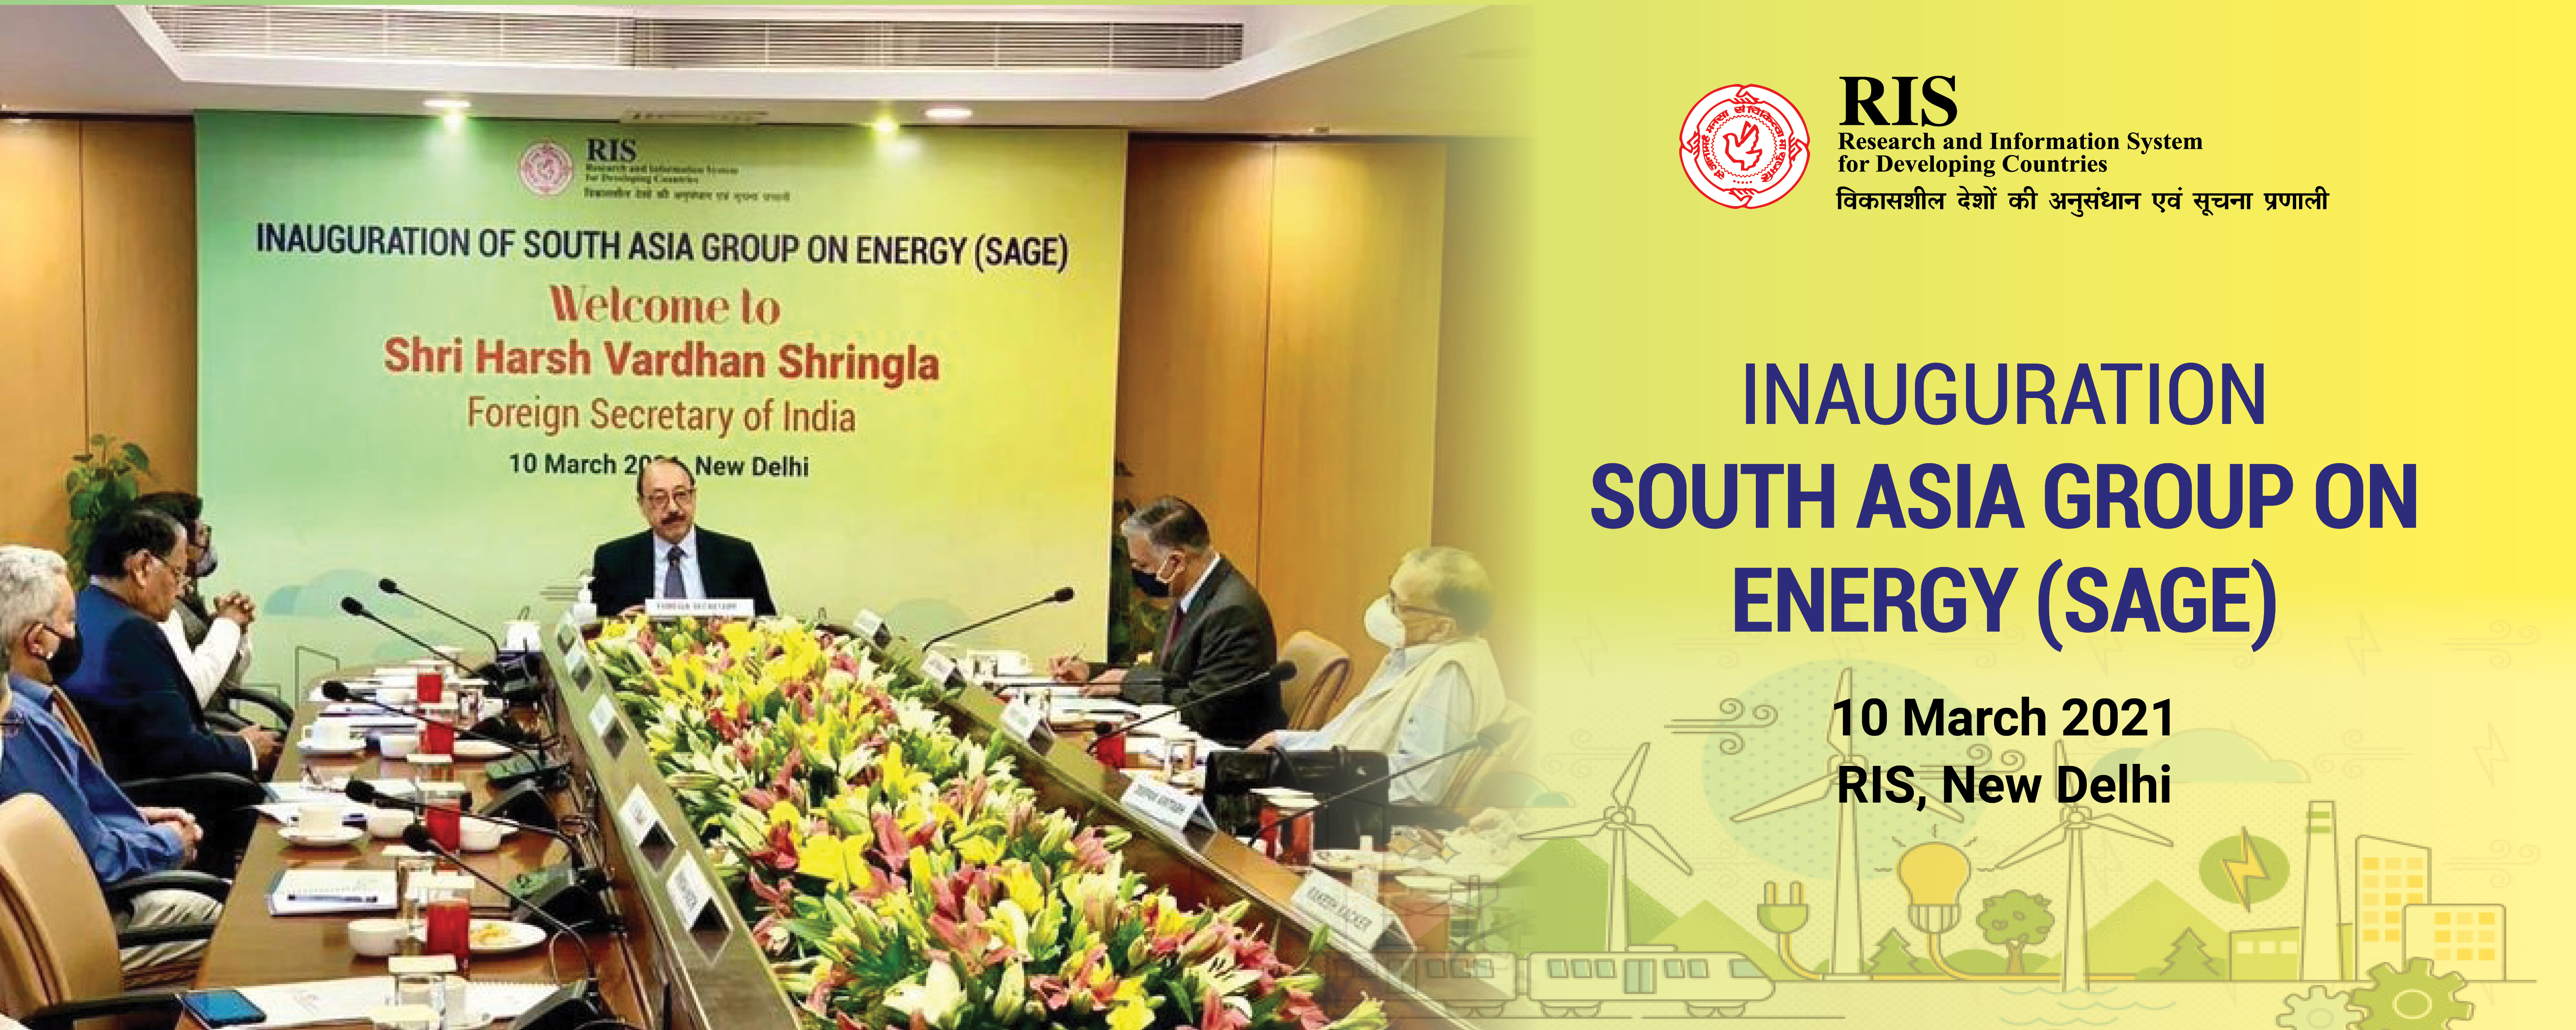 Inauguration-South-Asia-group-on-Energy(SAGE) 